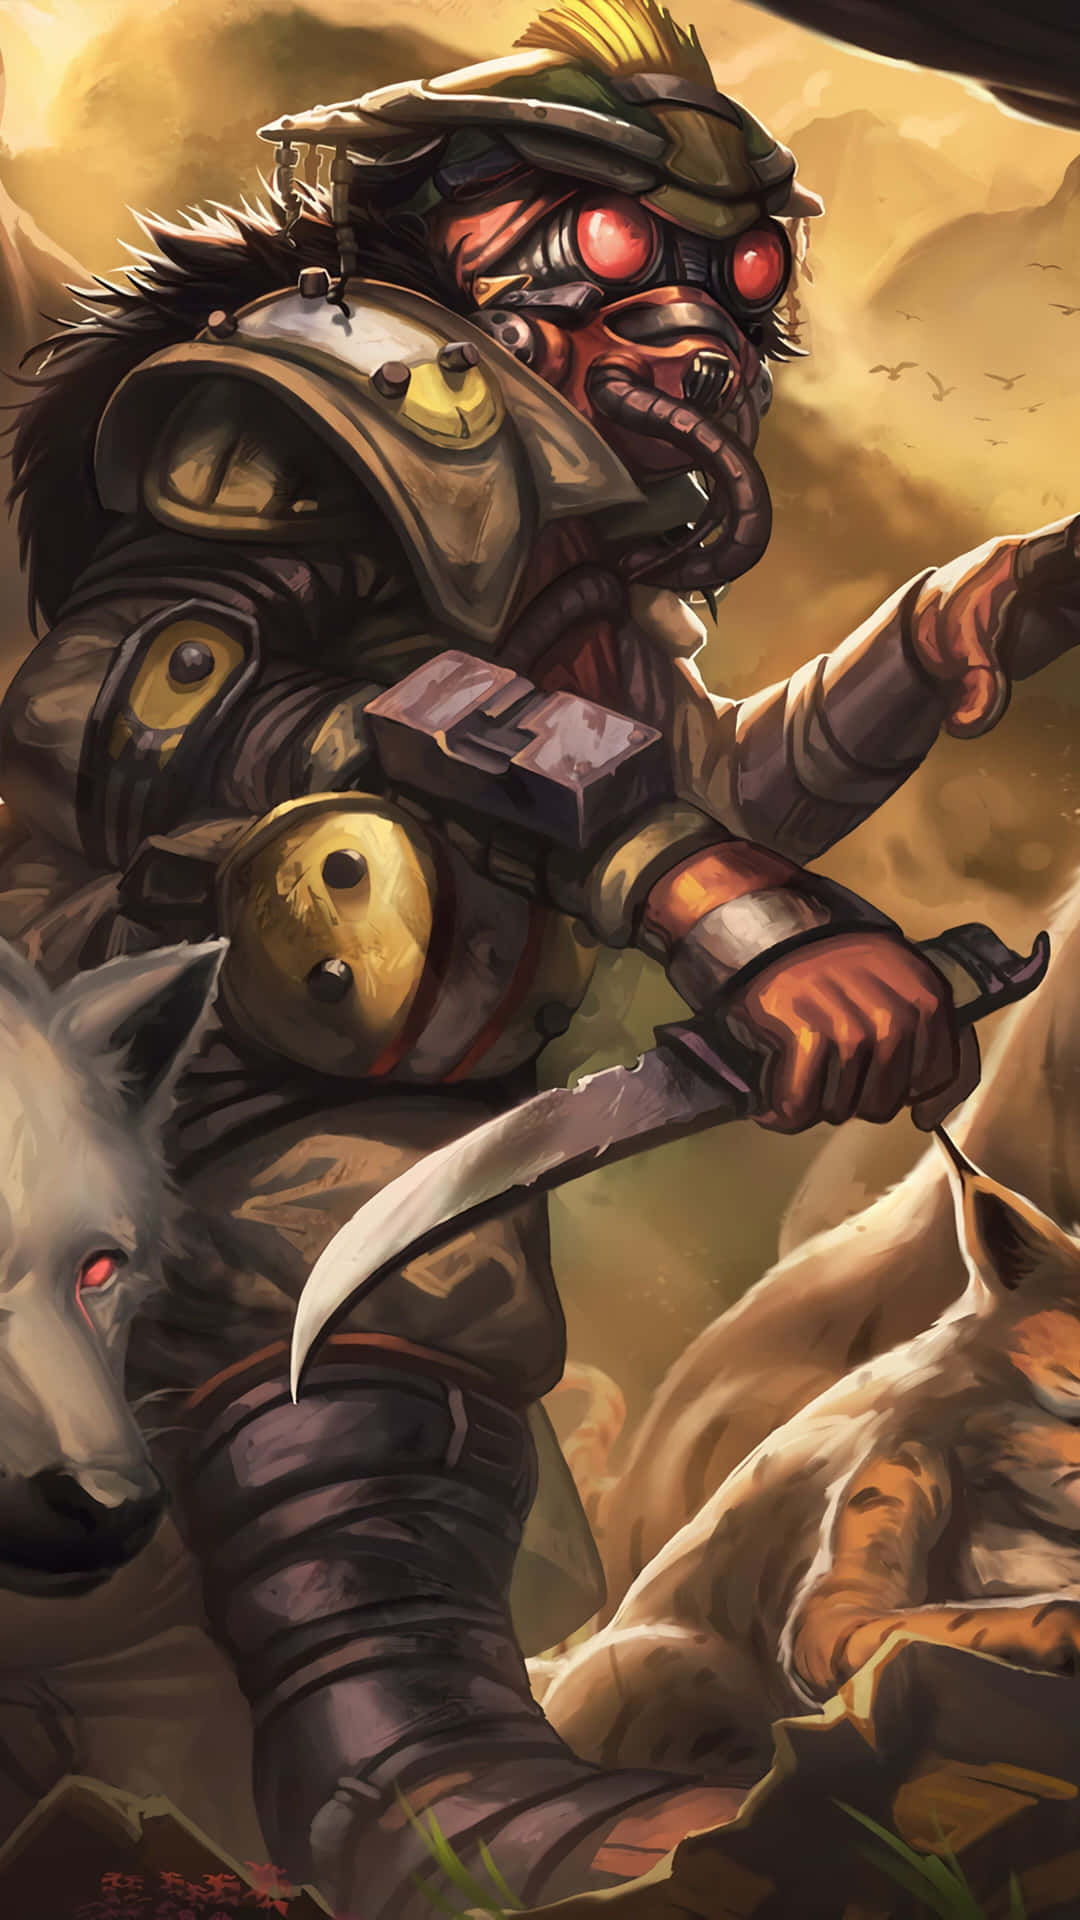 Cloak your face and unleash your inner warrior with Bloodhound from Apex Legends" Wallpaper